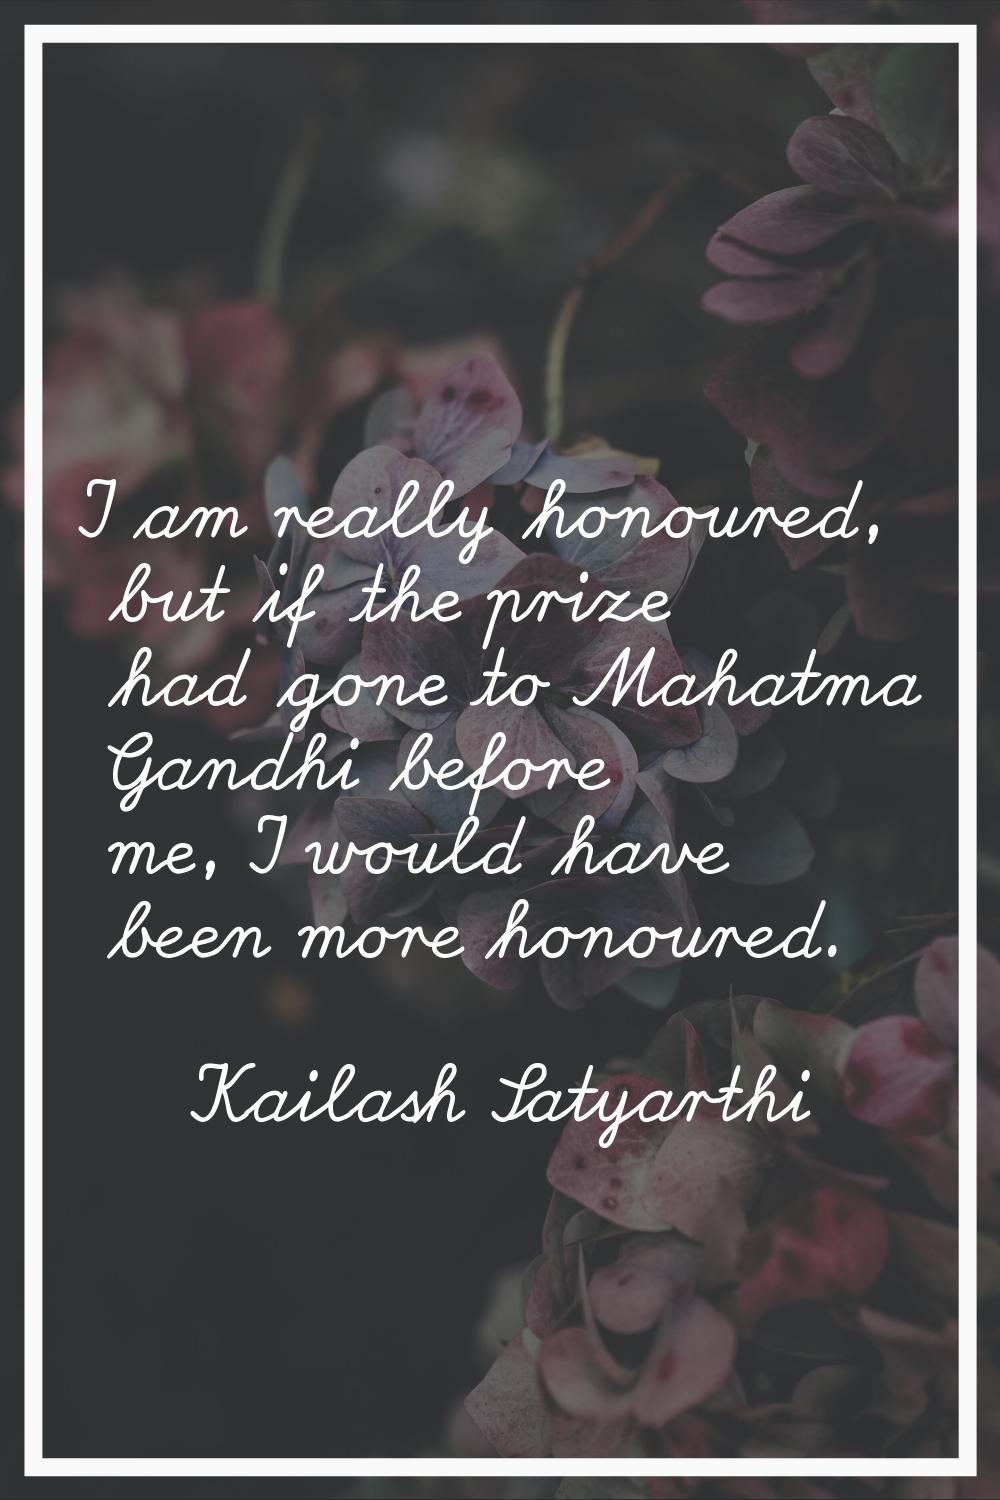 I am really honoured, but if the prize had gone to Mahatma Gandhi before me, I would have been more